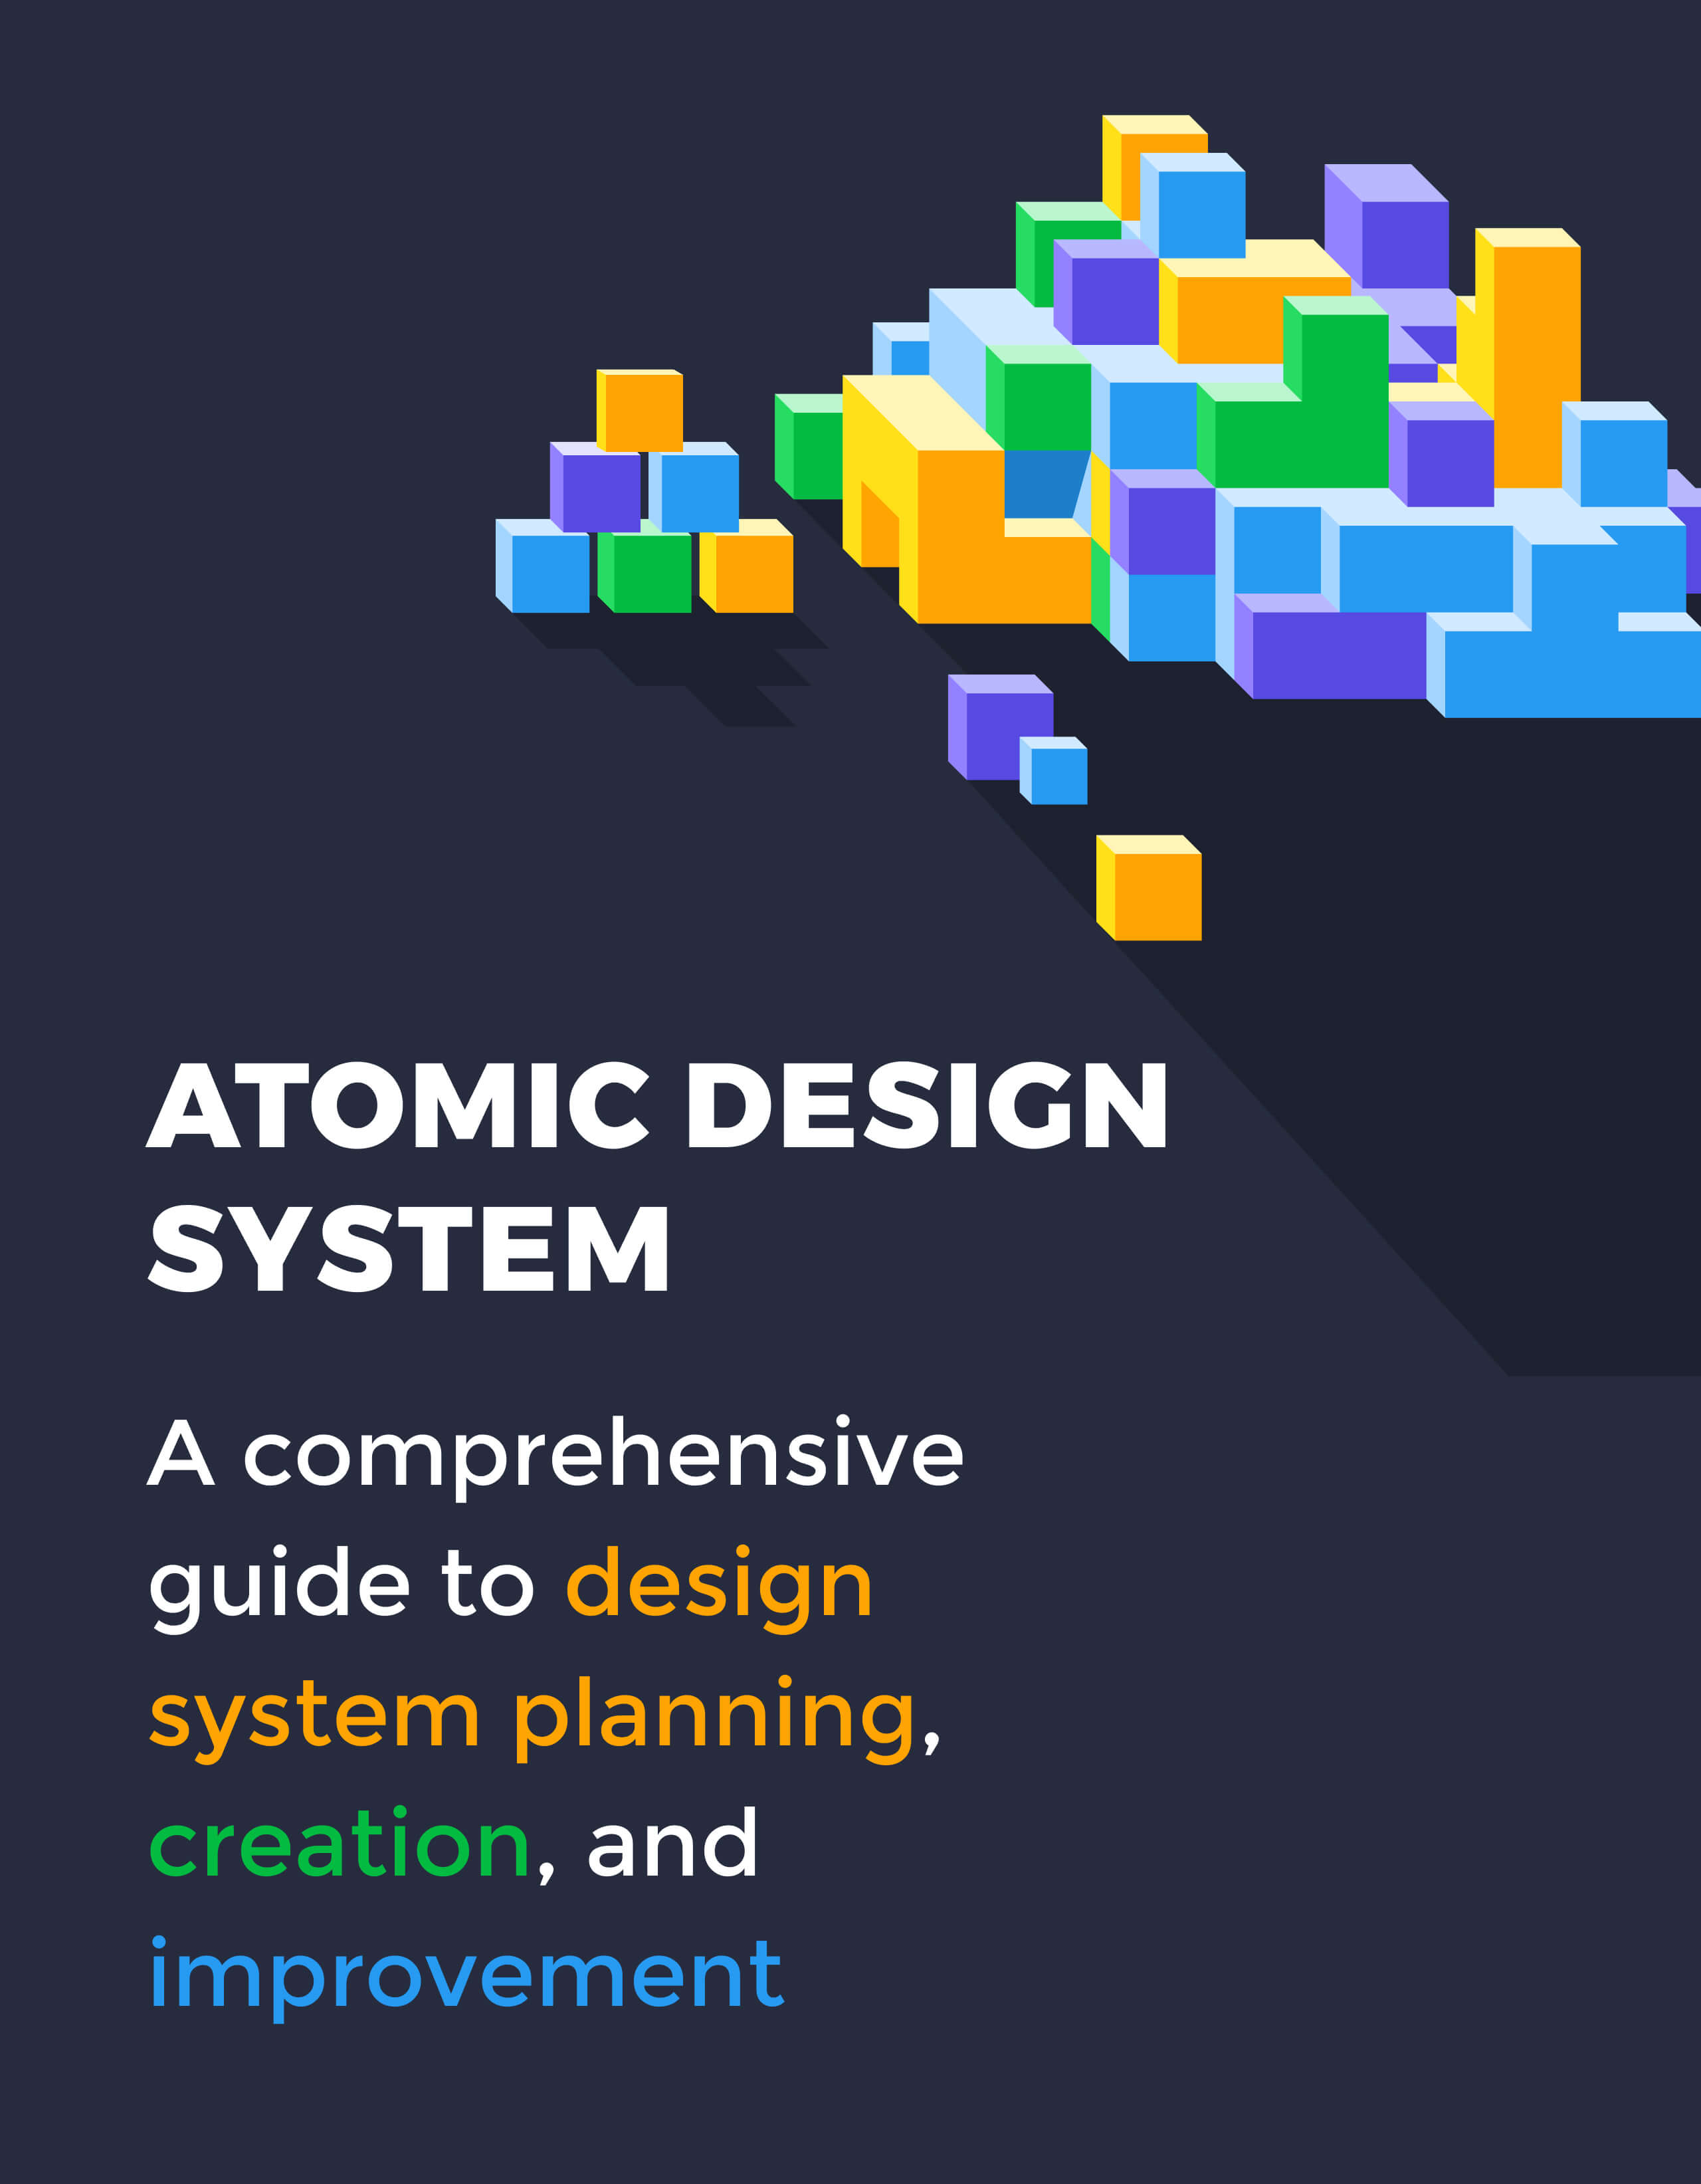 Atomic Design System: A comprehensive guide to design system planning, creation, and improvement